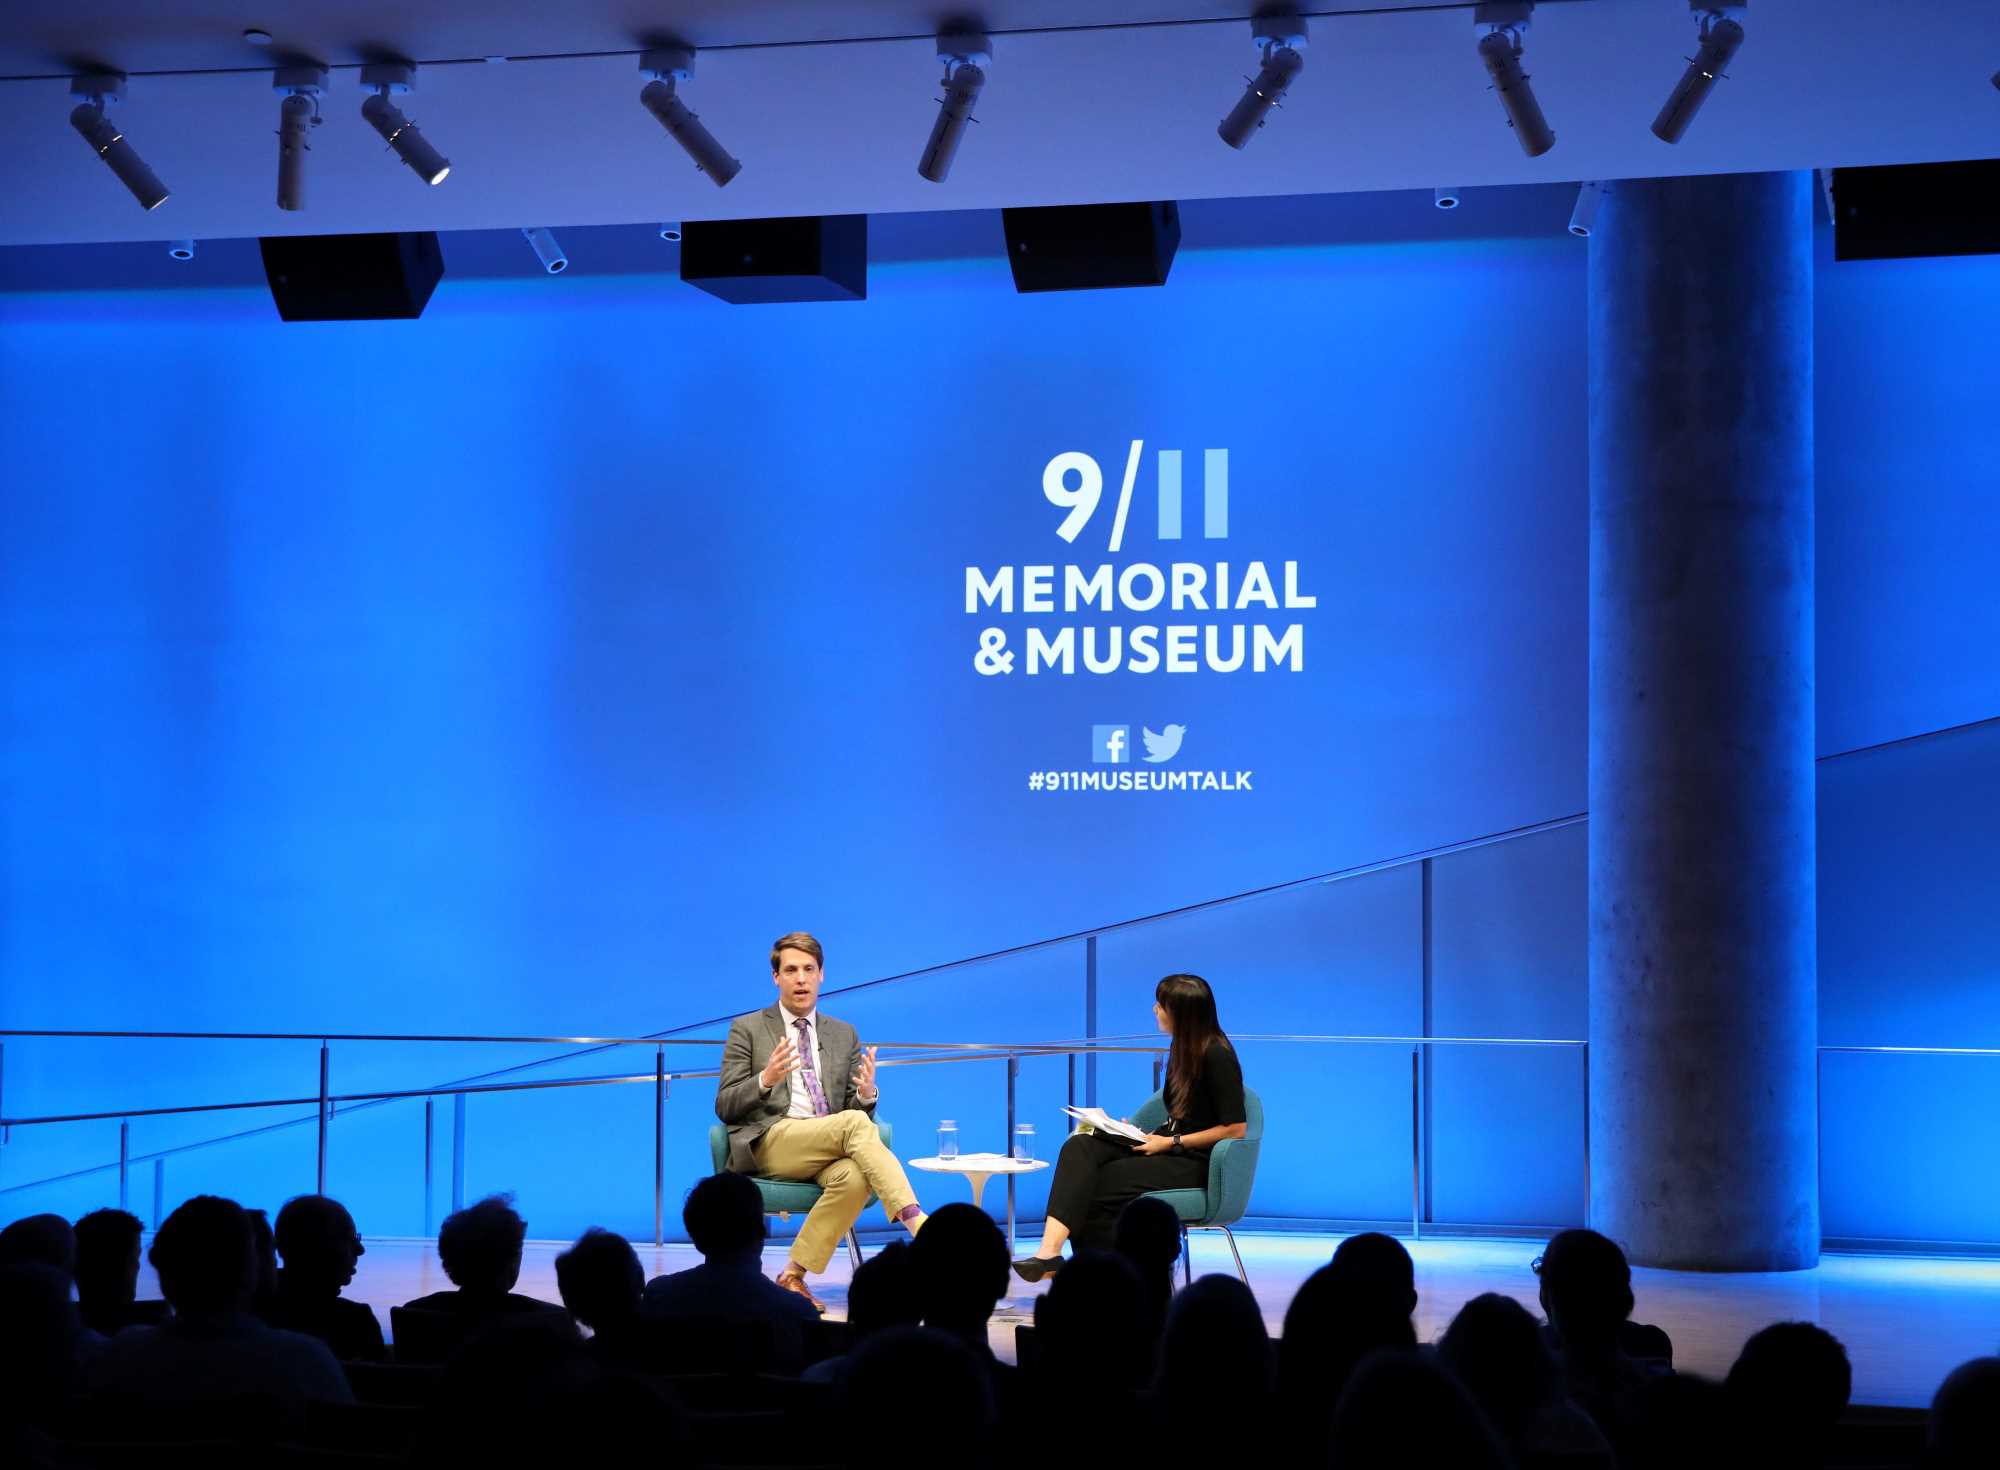 A wide shot of the Museum Auditorium shows journalist and historian Garrett Graff gesturing with both hands as he speaks onstage at the public program, Only Plane in the Sky. A woman sitting next to him who is hosting the event listens while holding a clipboard. Audience members are silhouetted in the foreground by blue light behind onstage.